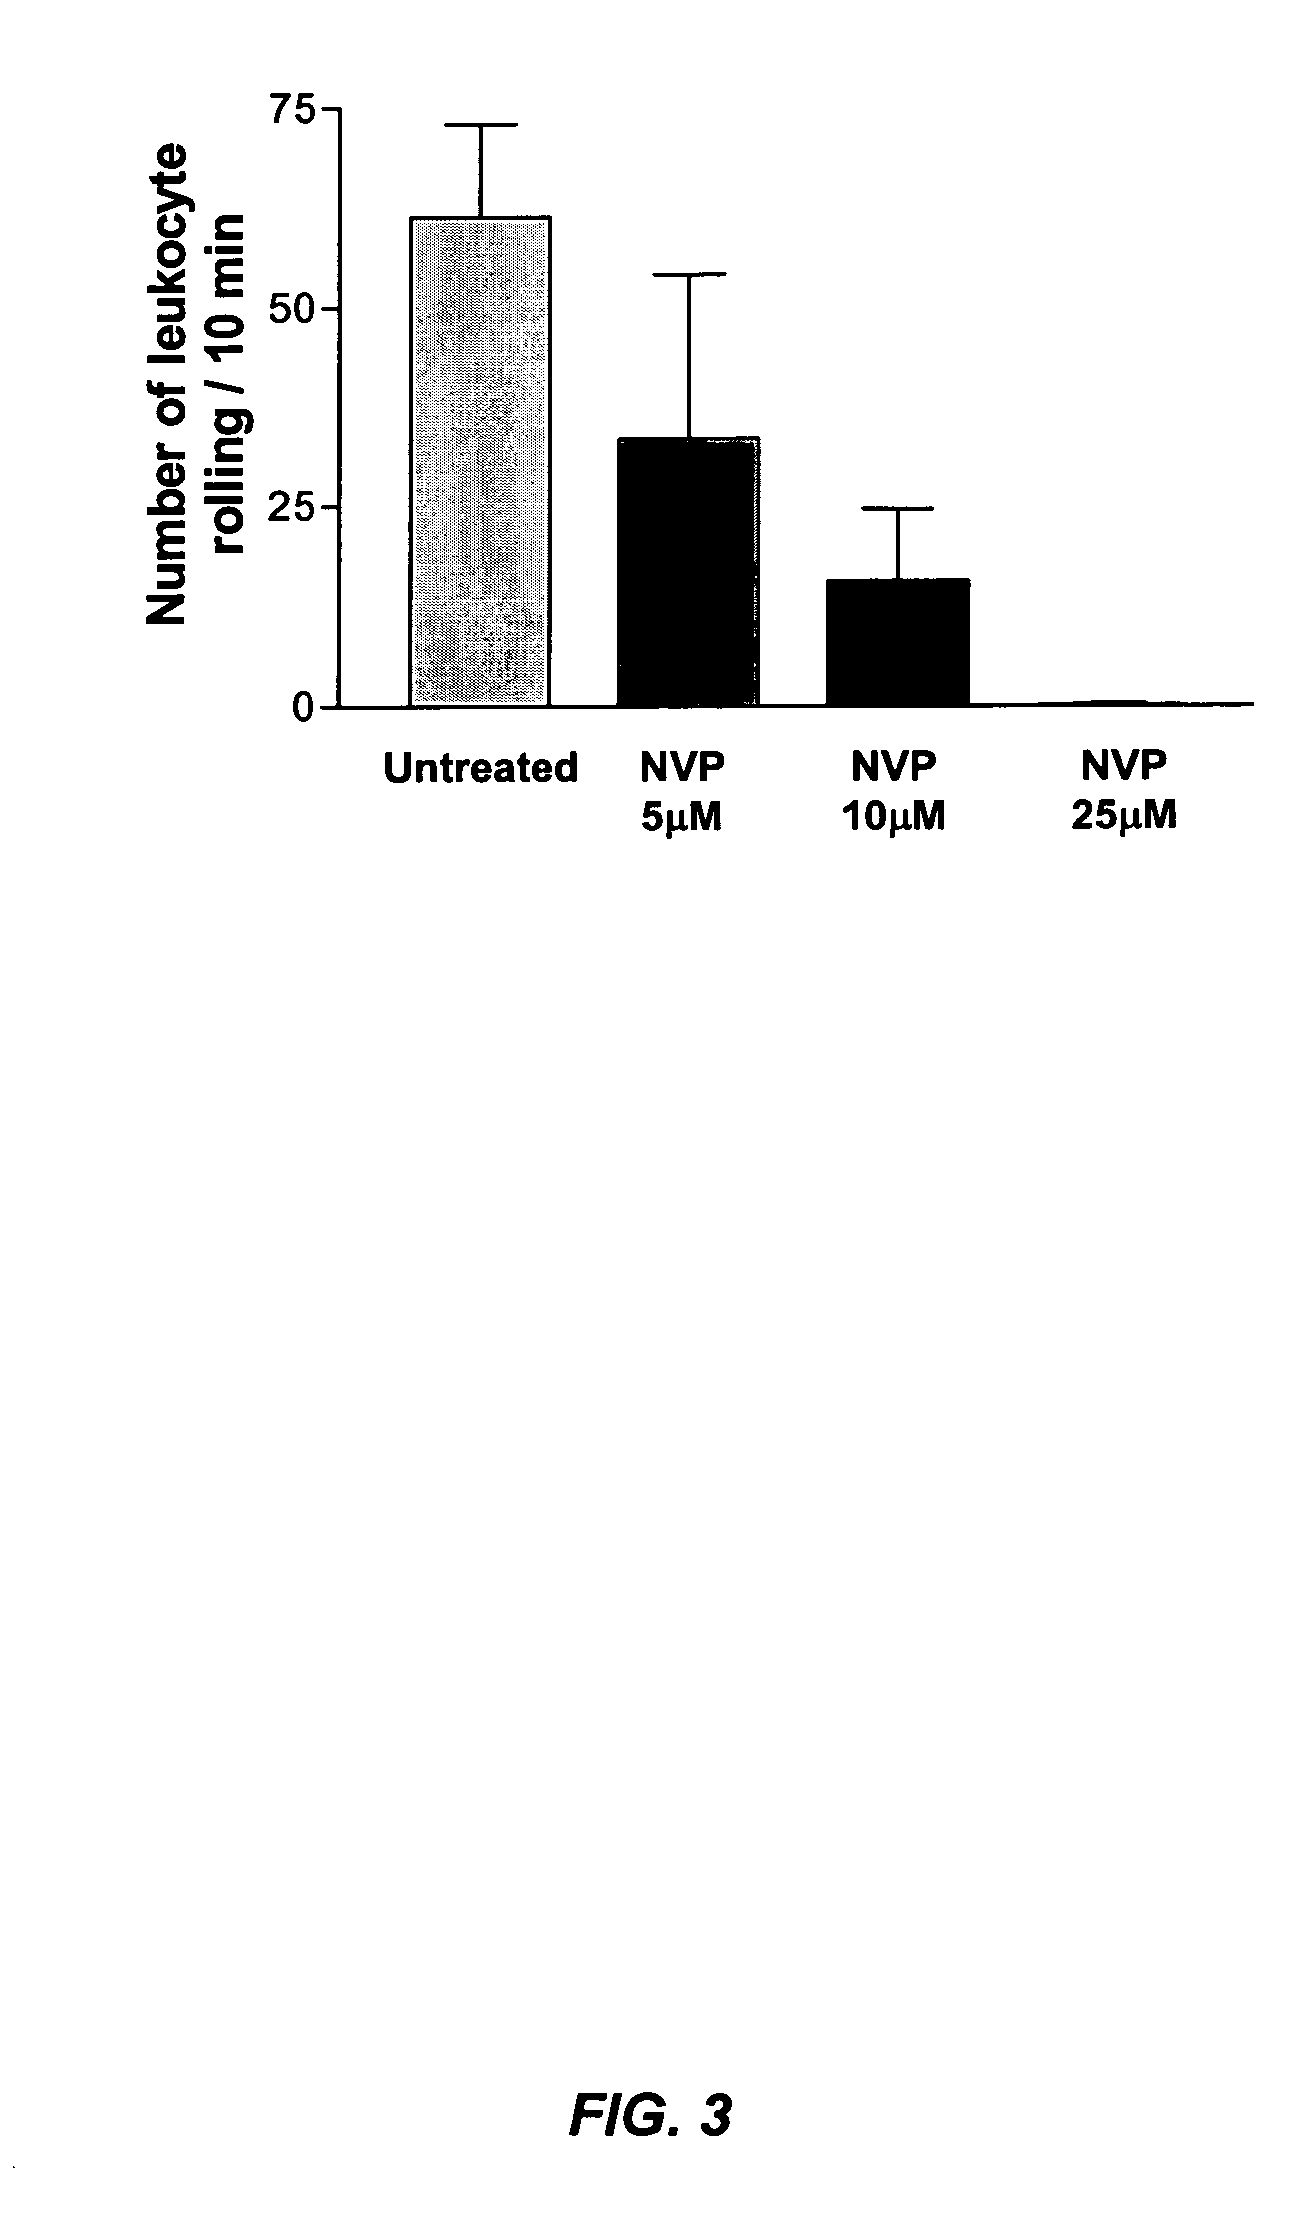 Methods of treatment with Syk inhibitors